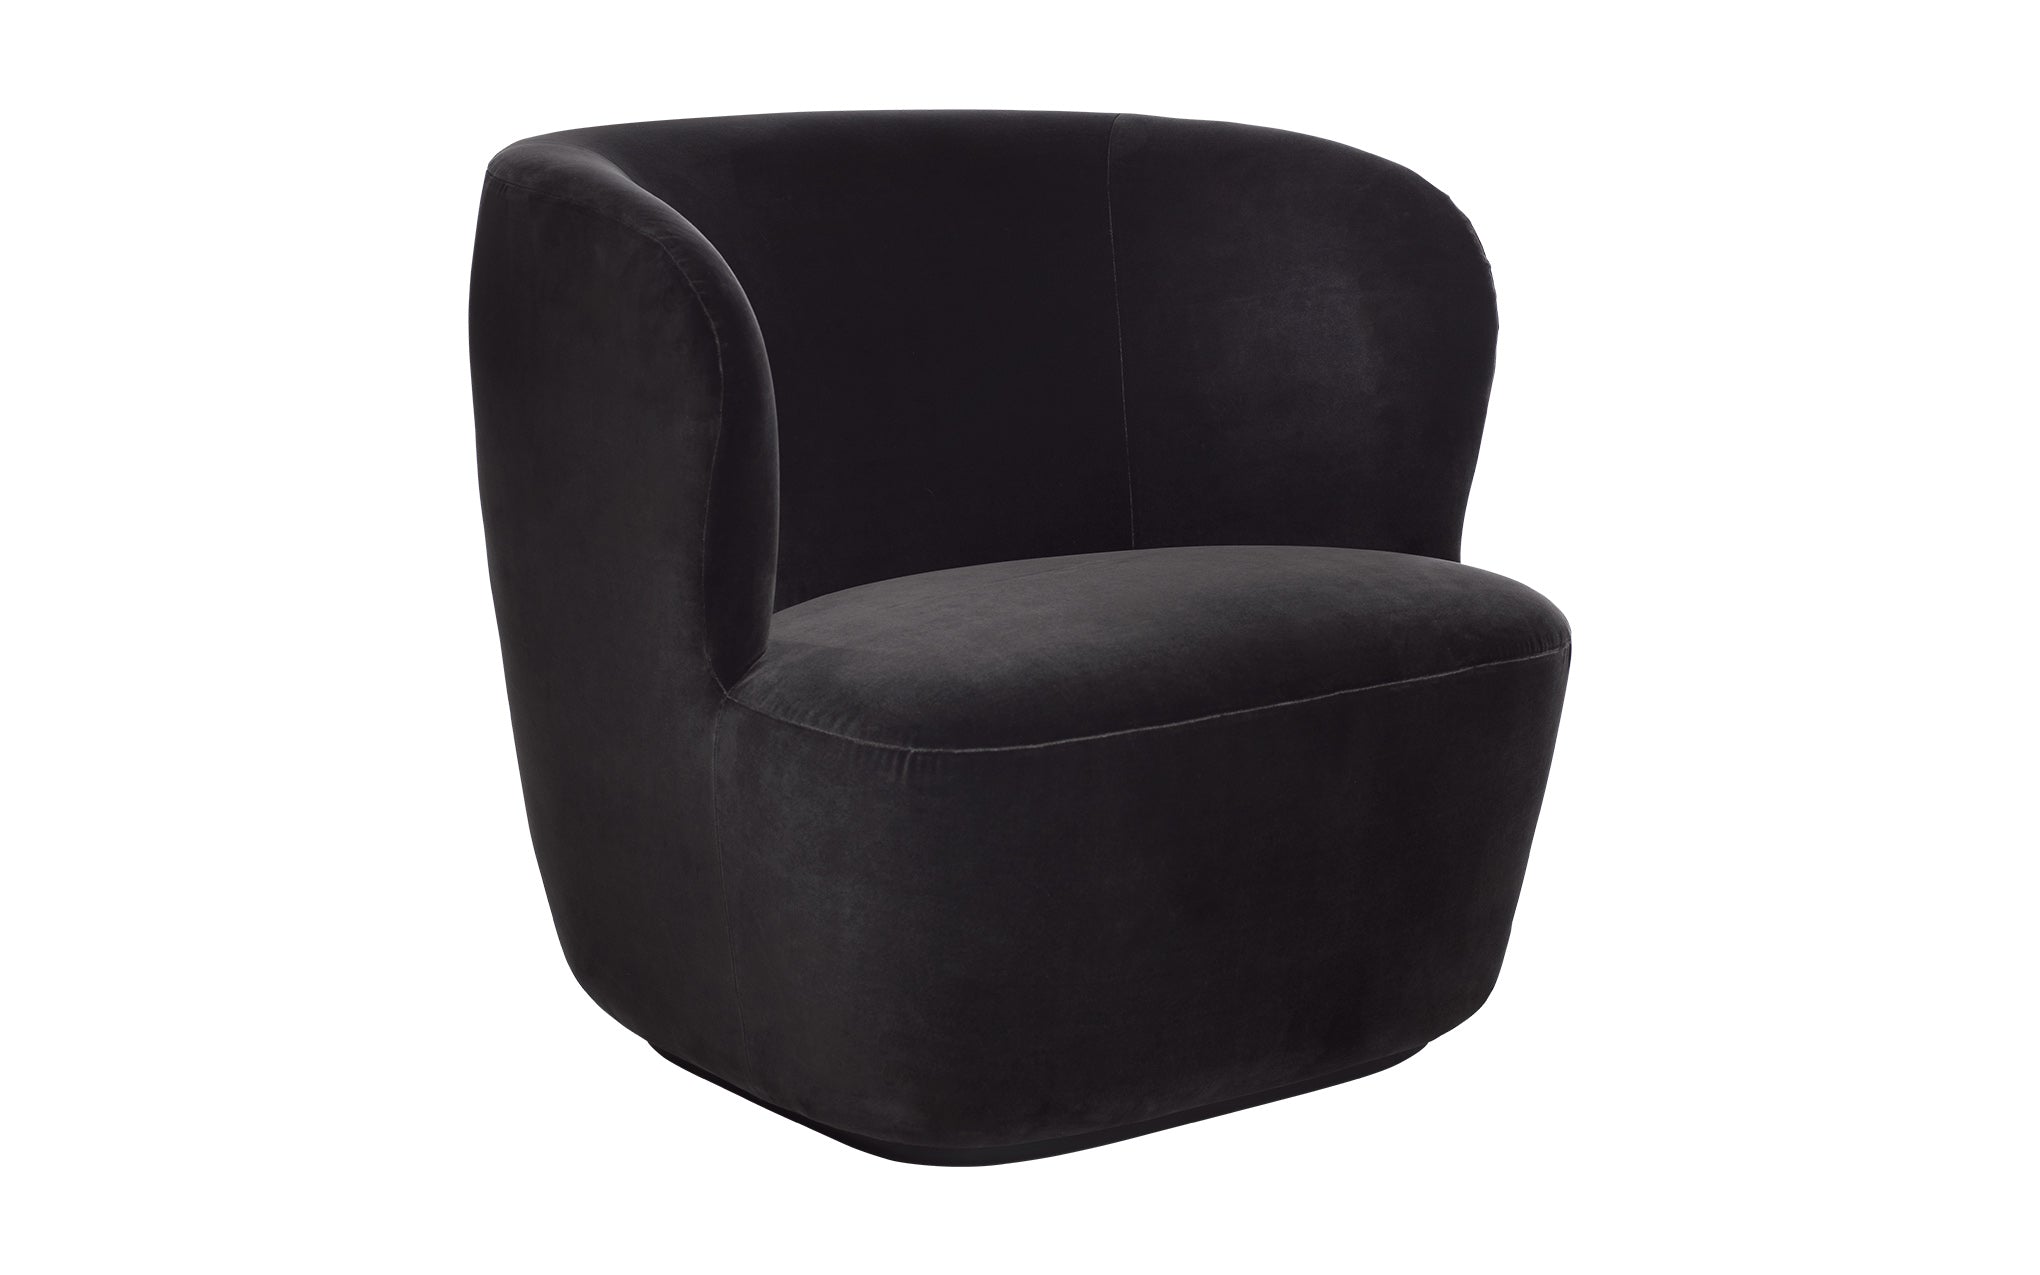 Stay lounge chair - black base | SCP